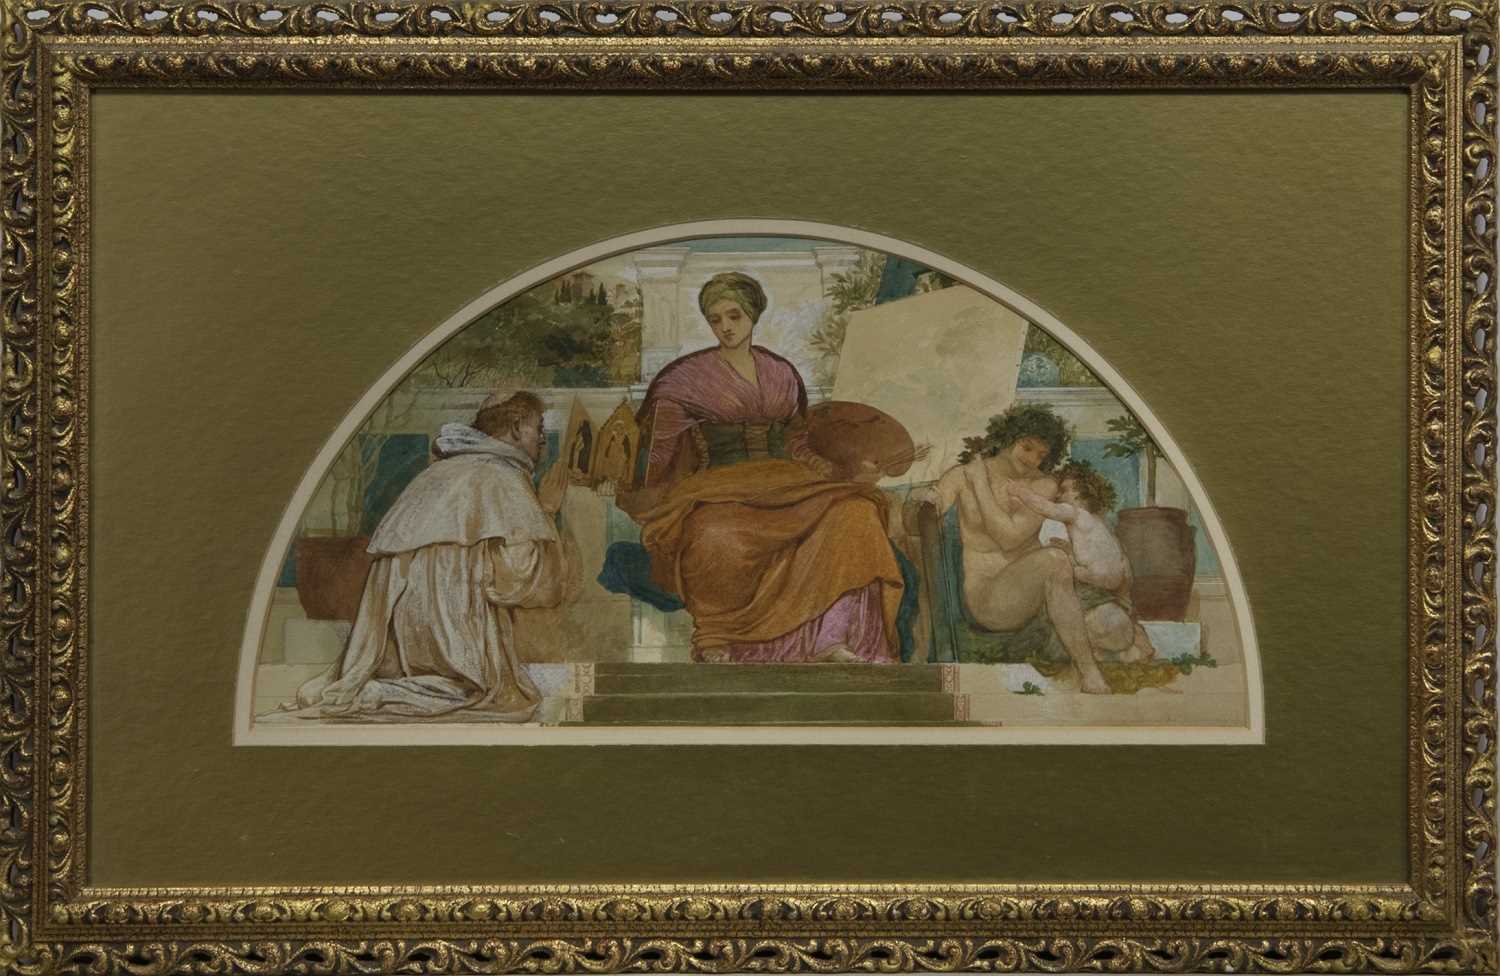 Lot 52 - THE PAINTING LESSON, A WATERCOLOUR ATTRIBUTED TO JOSEPH NOEL PATON